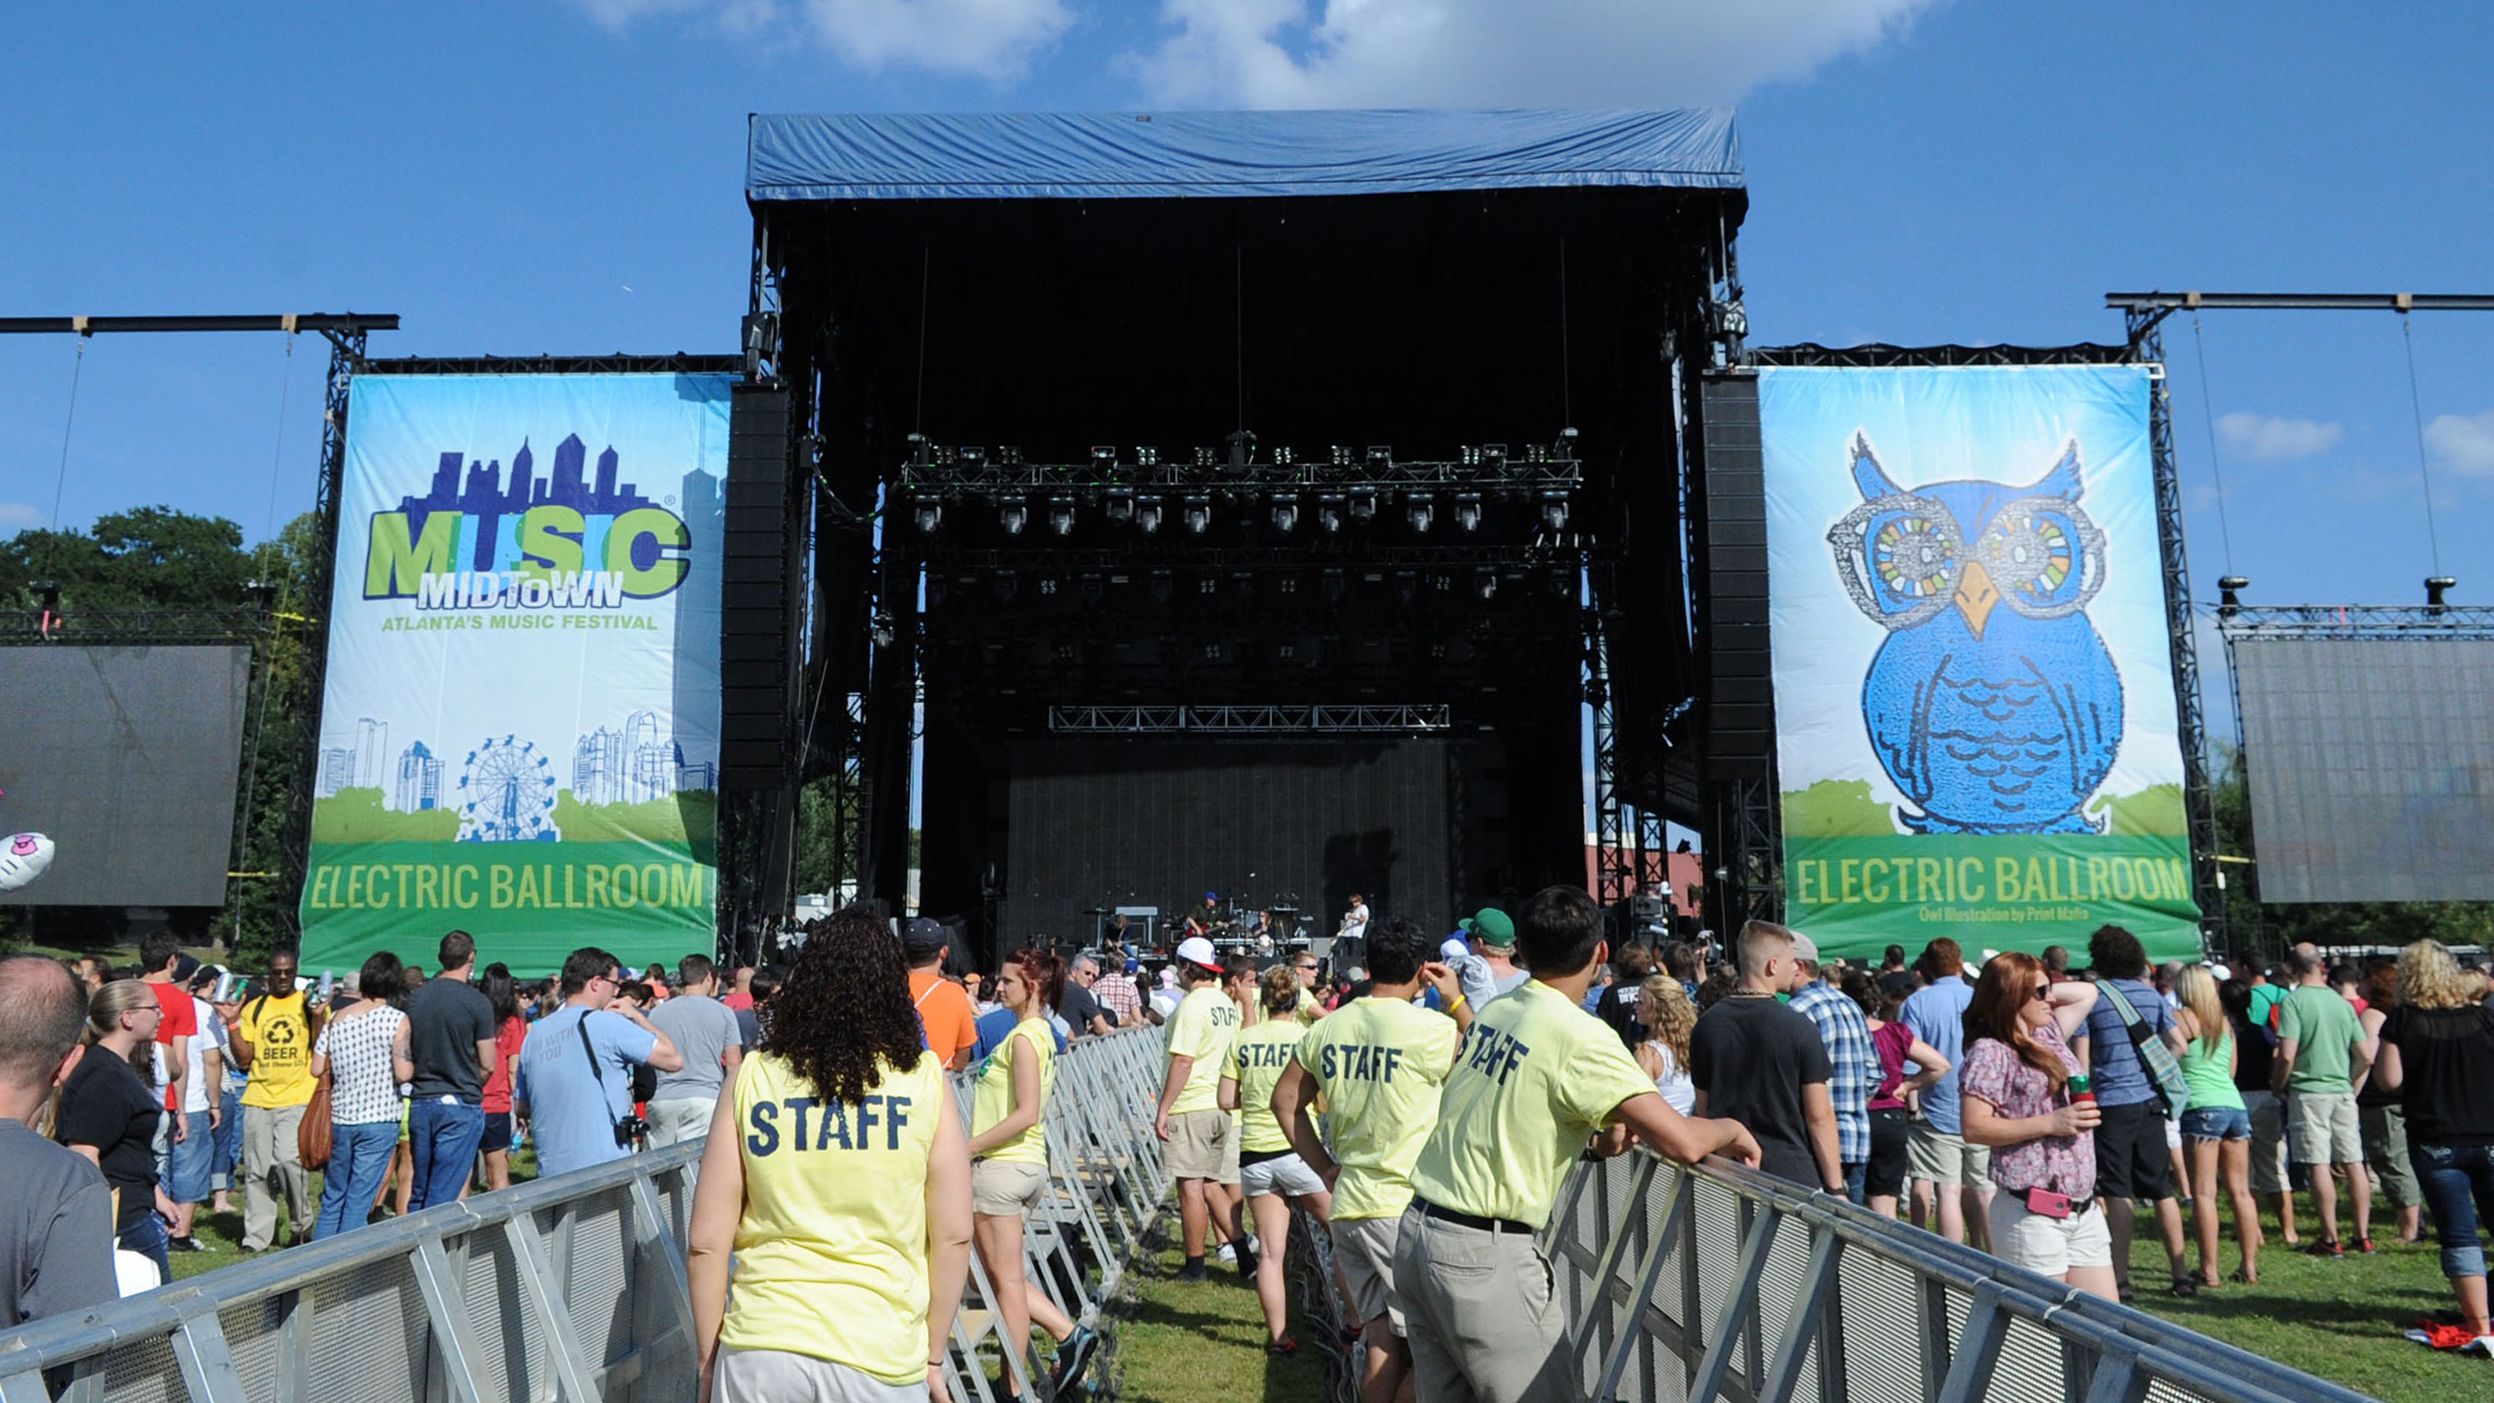 Atlanta’s Music Midtown festival canceled, reportedly due to state’s